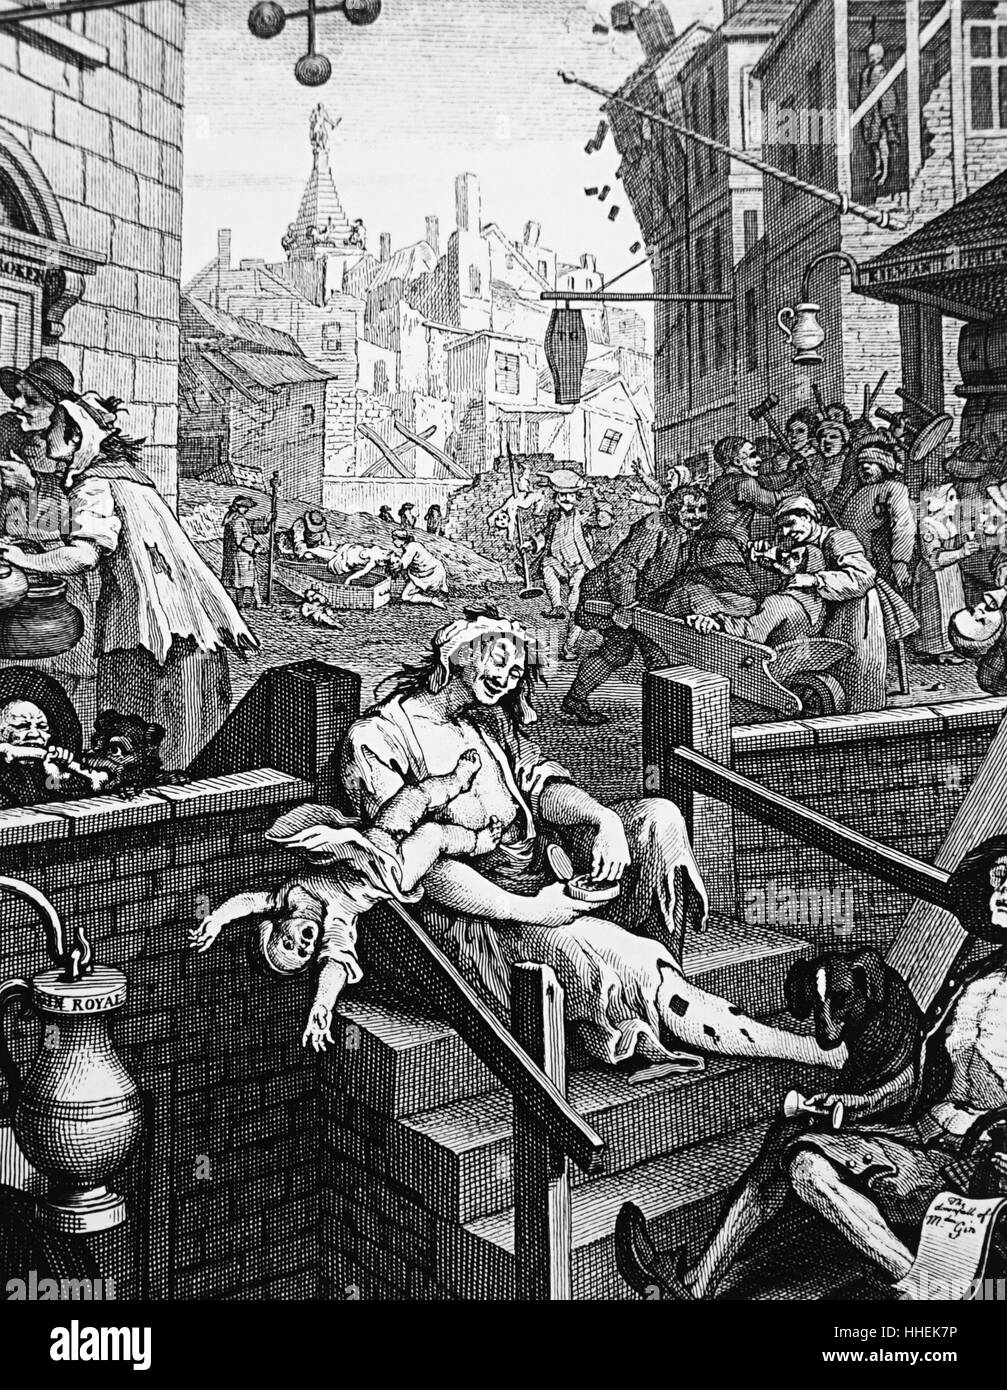 Engraving titled 'Gin Lane' by William Hogarth (1697-1764) depicting the evils of unbridled drinking of spirits. Dated 18th Century Stock Photo